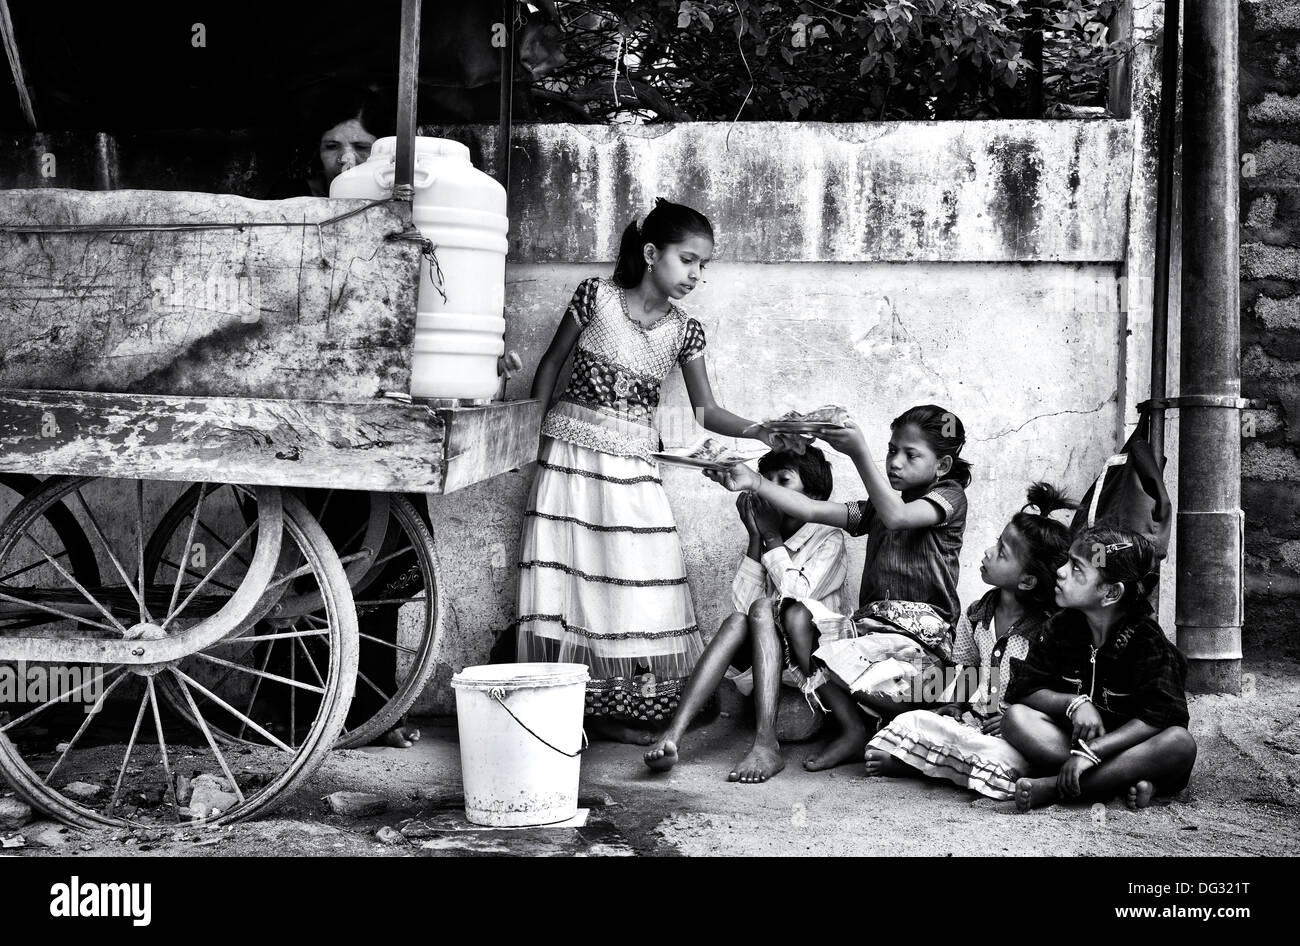 Indian lower caste children eating dosa for breakfast on an indian street. Andhra Pradesh, India. Monochrome Stock Photo